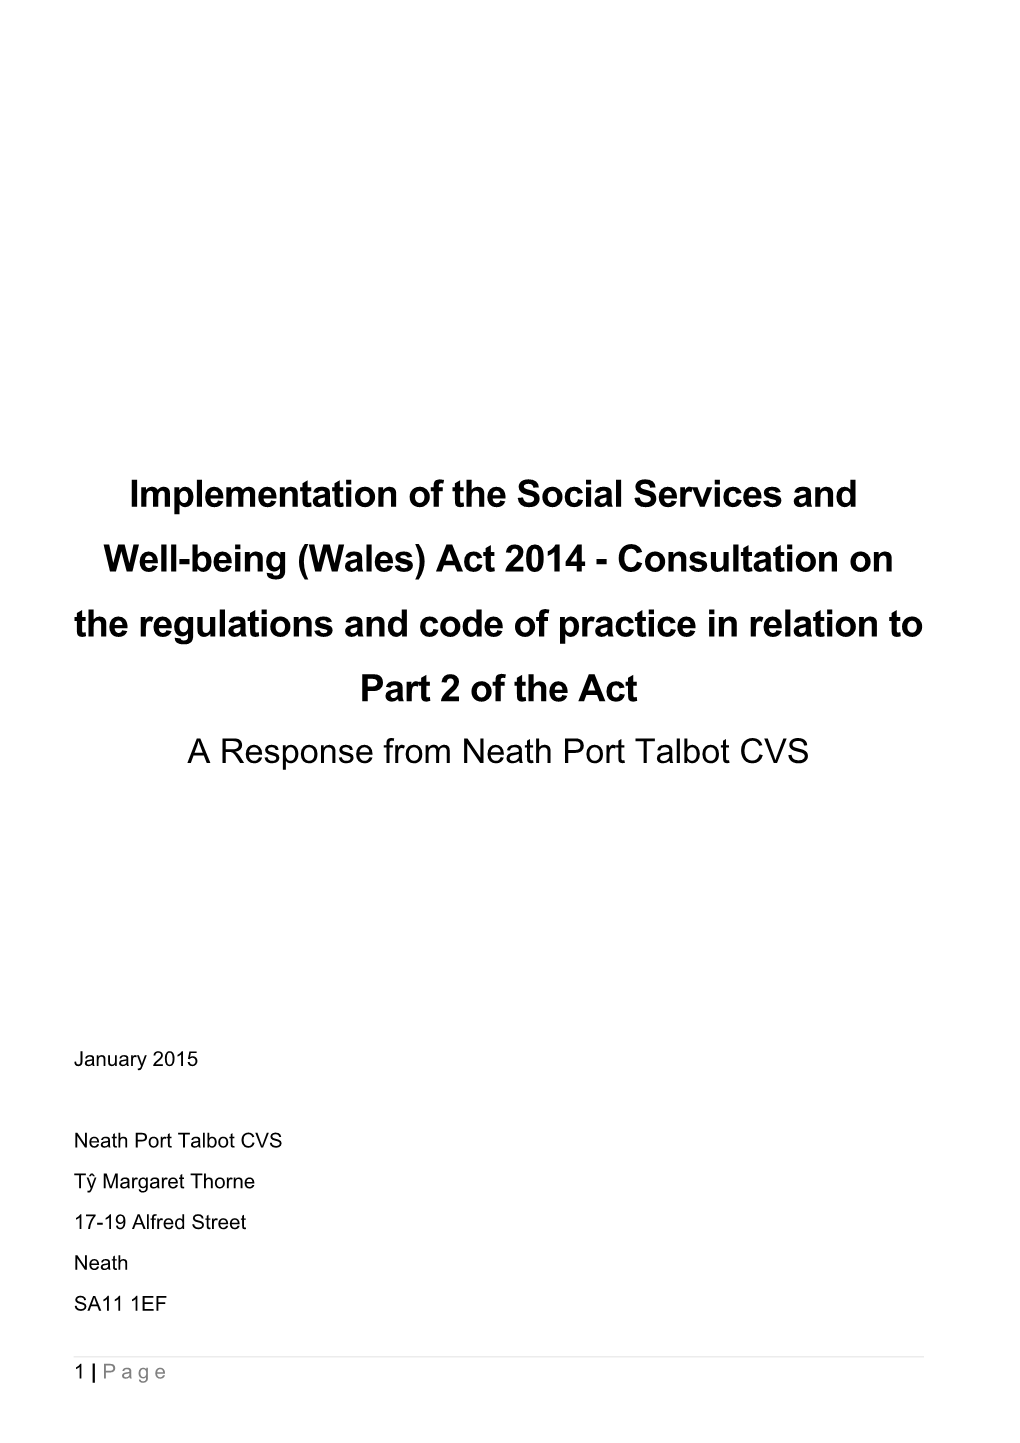 Implementation of the Social Services And